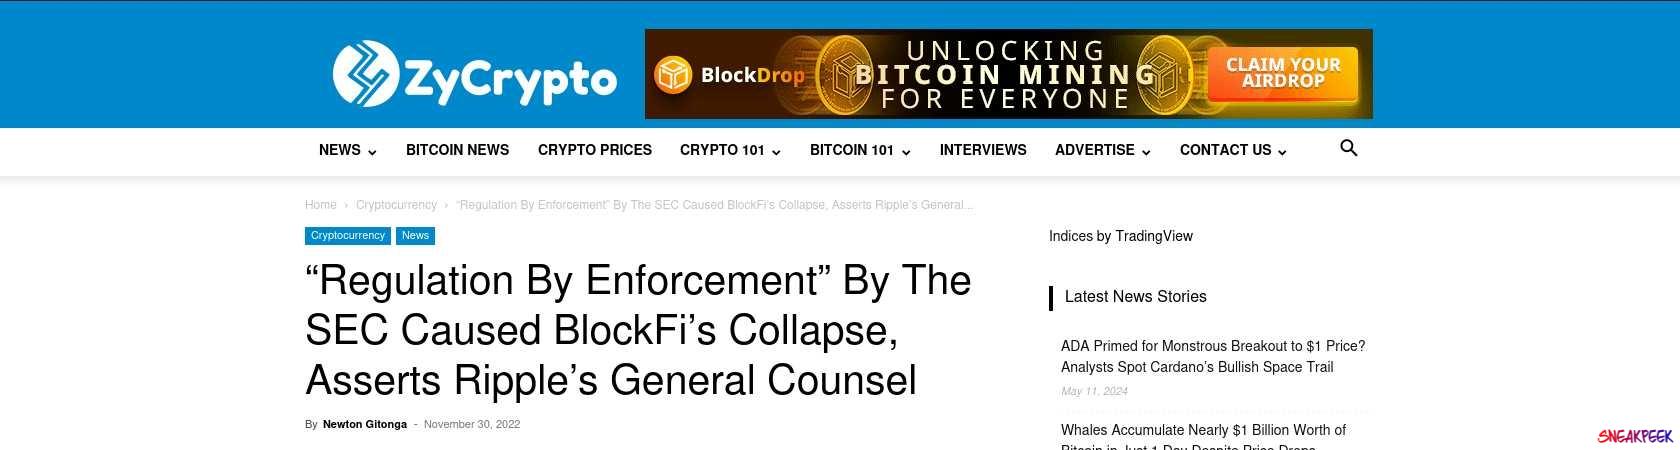 Read the full Article:  ⭲ “Regulation By Enforcement” By The SEC Caused BlockFi’s Collapse, Asserts Ripple’s General Counsel